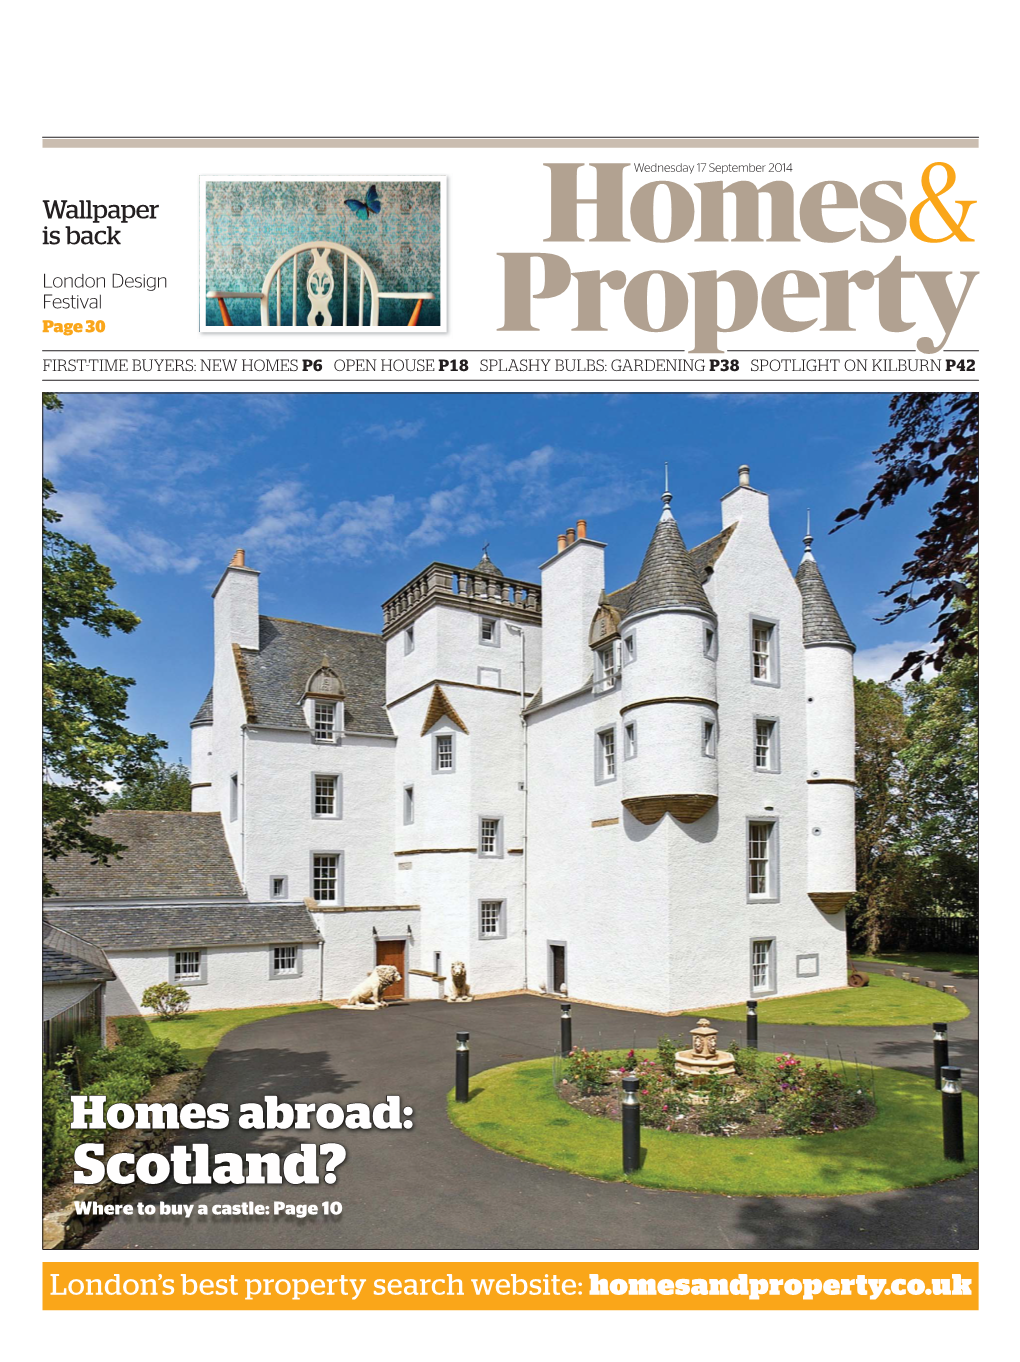 Scotland? Where to Buy a Castle: Page 10